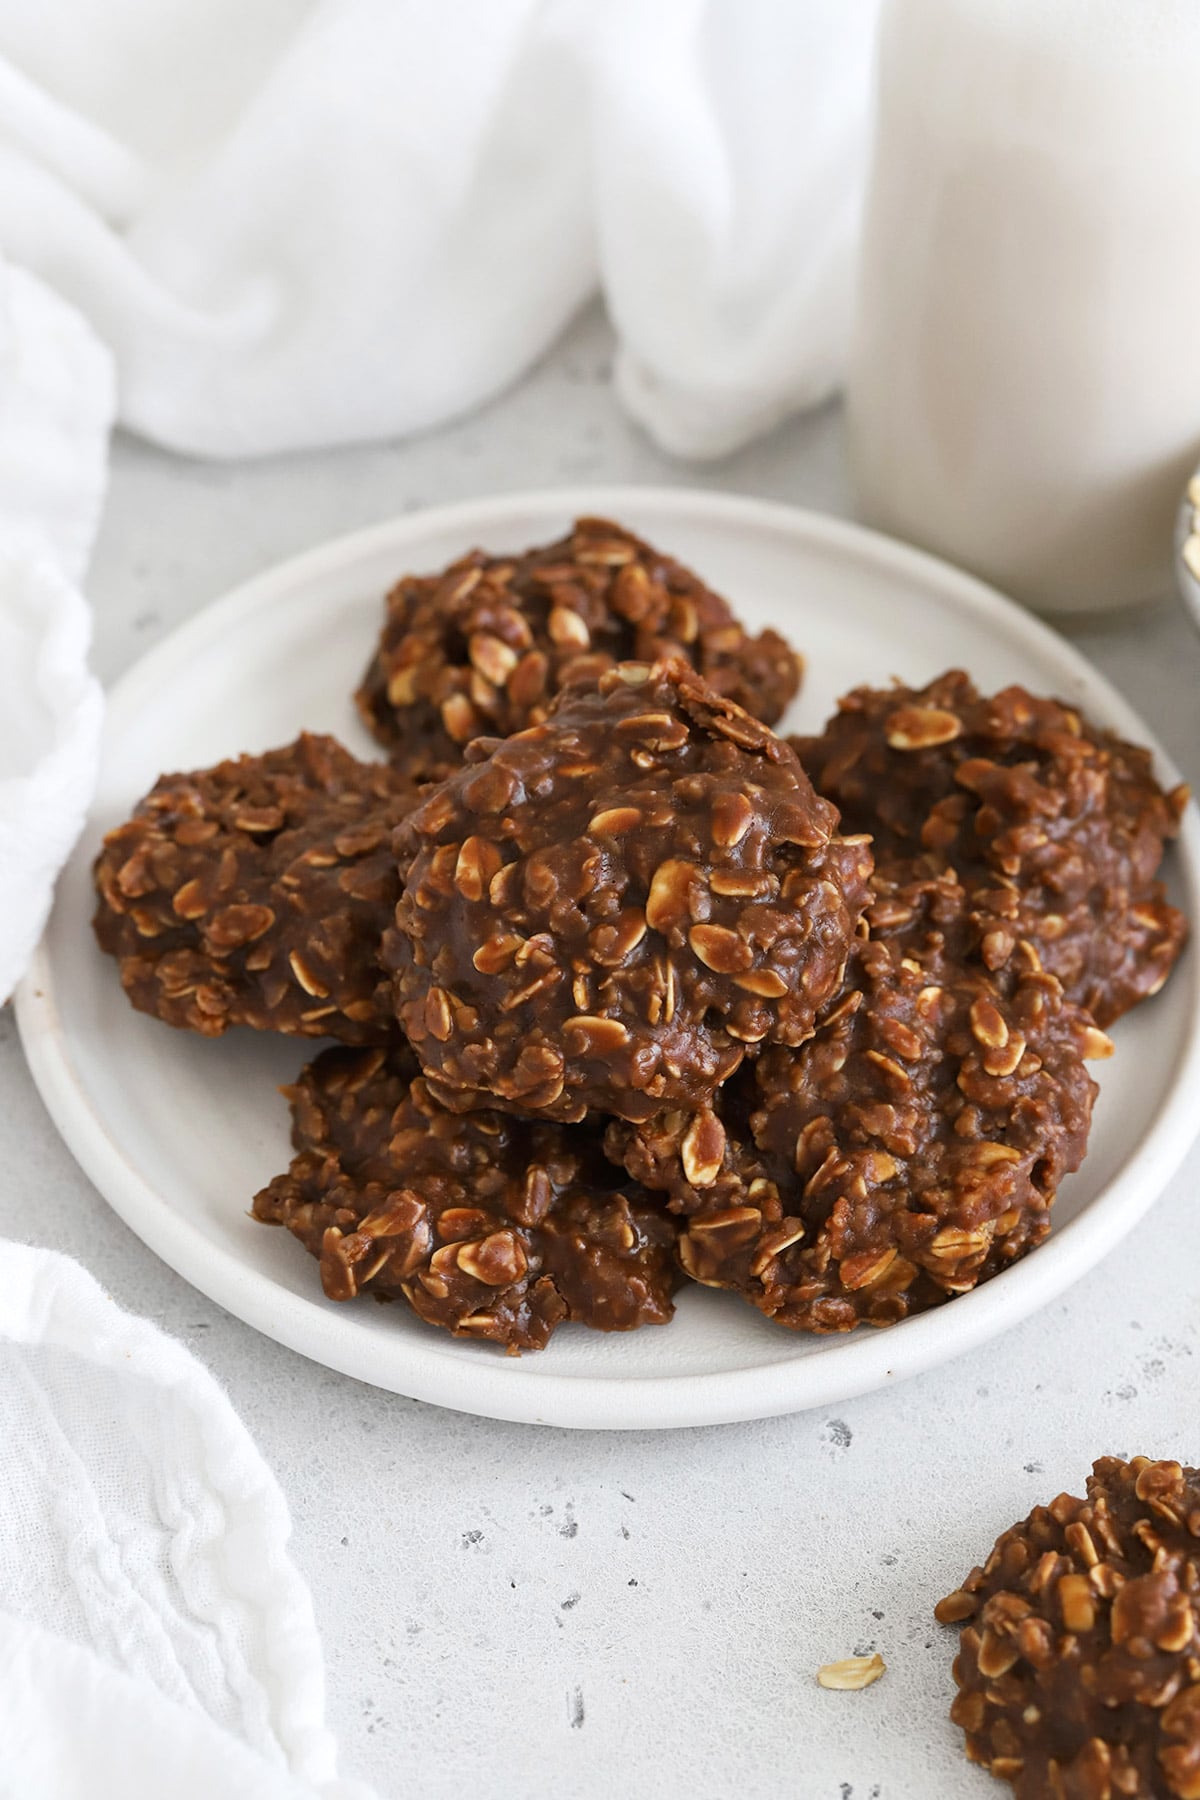 A plate full of gluten-free chocolate peanut butter no-bake cookies